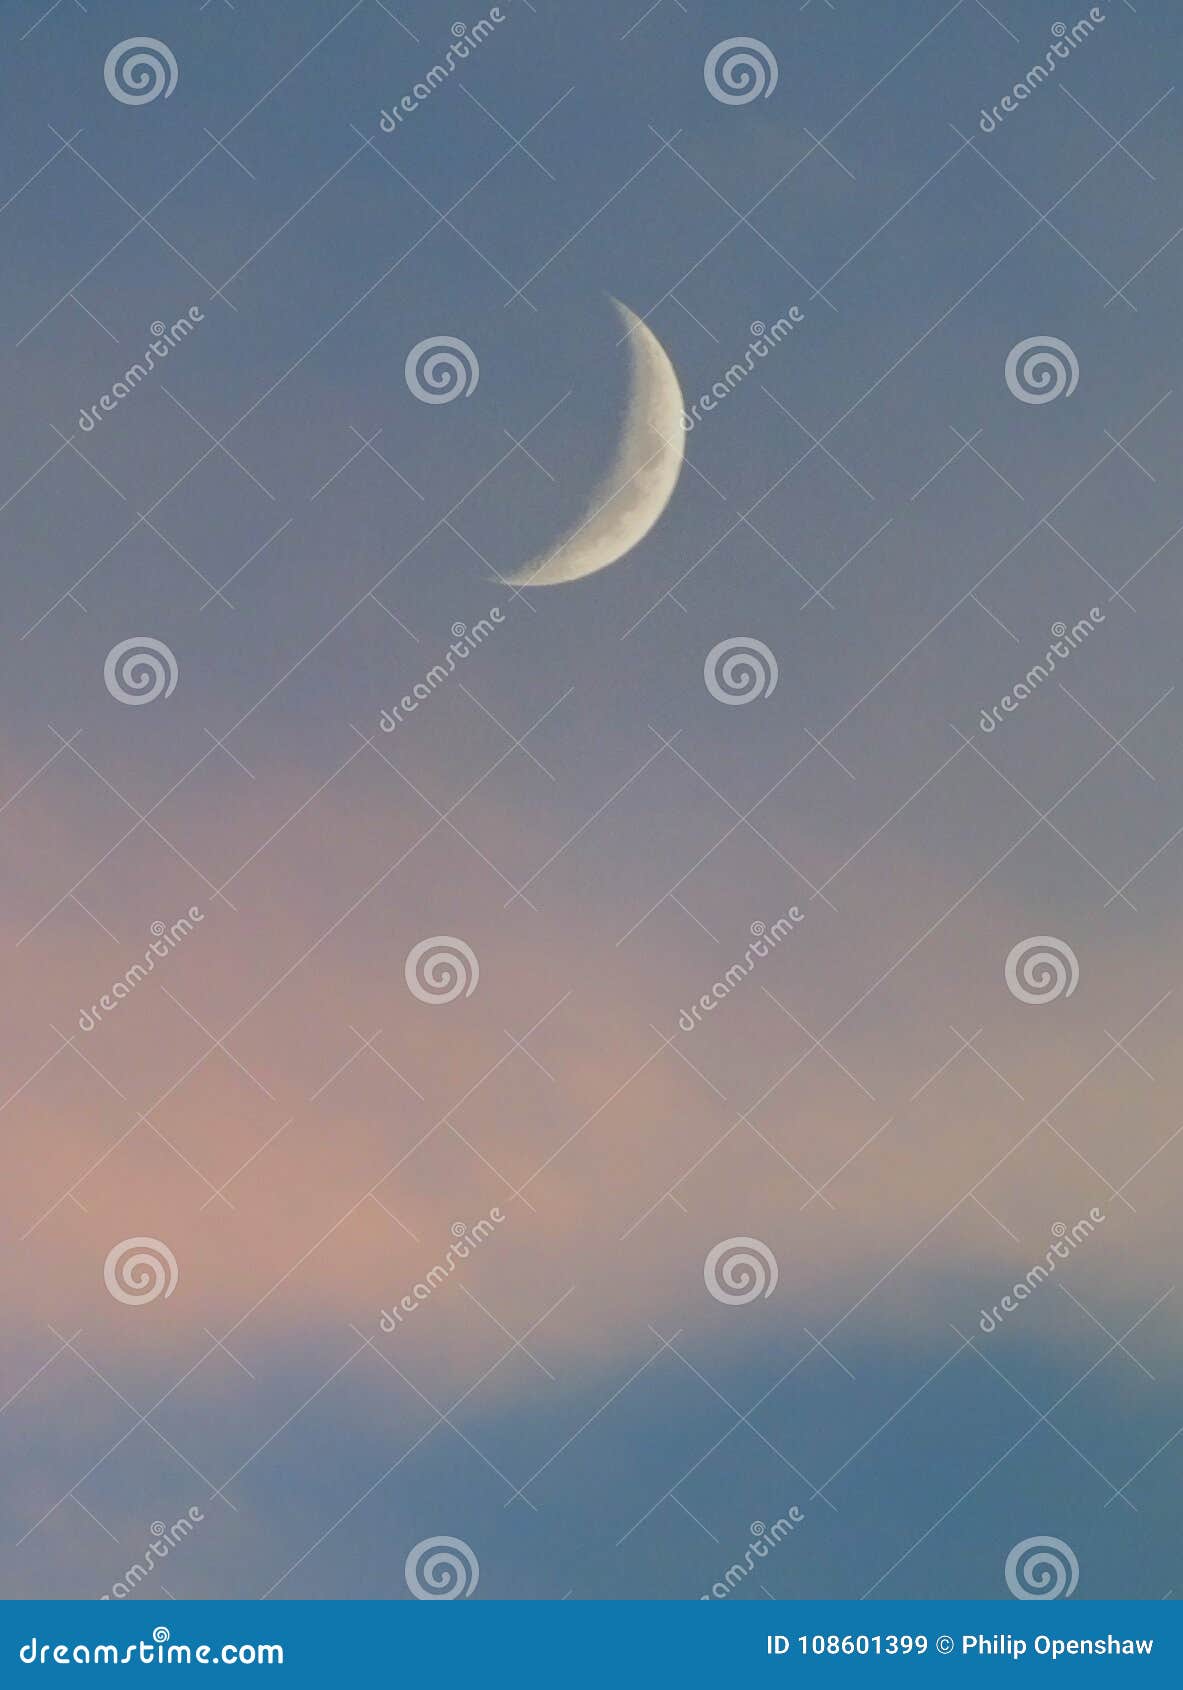 crescent moon in a blue sky with pale pink clouds